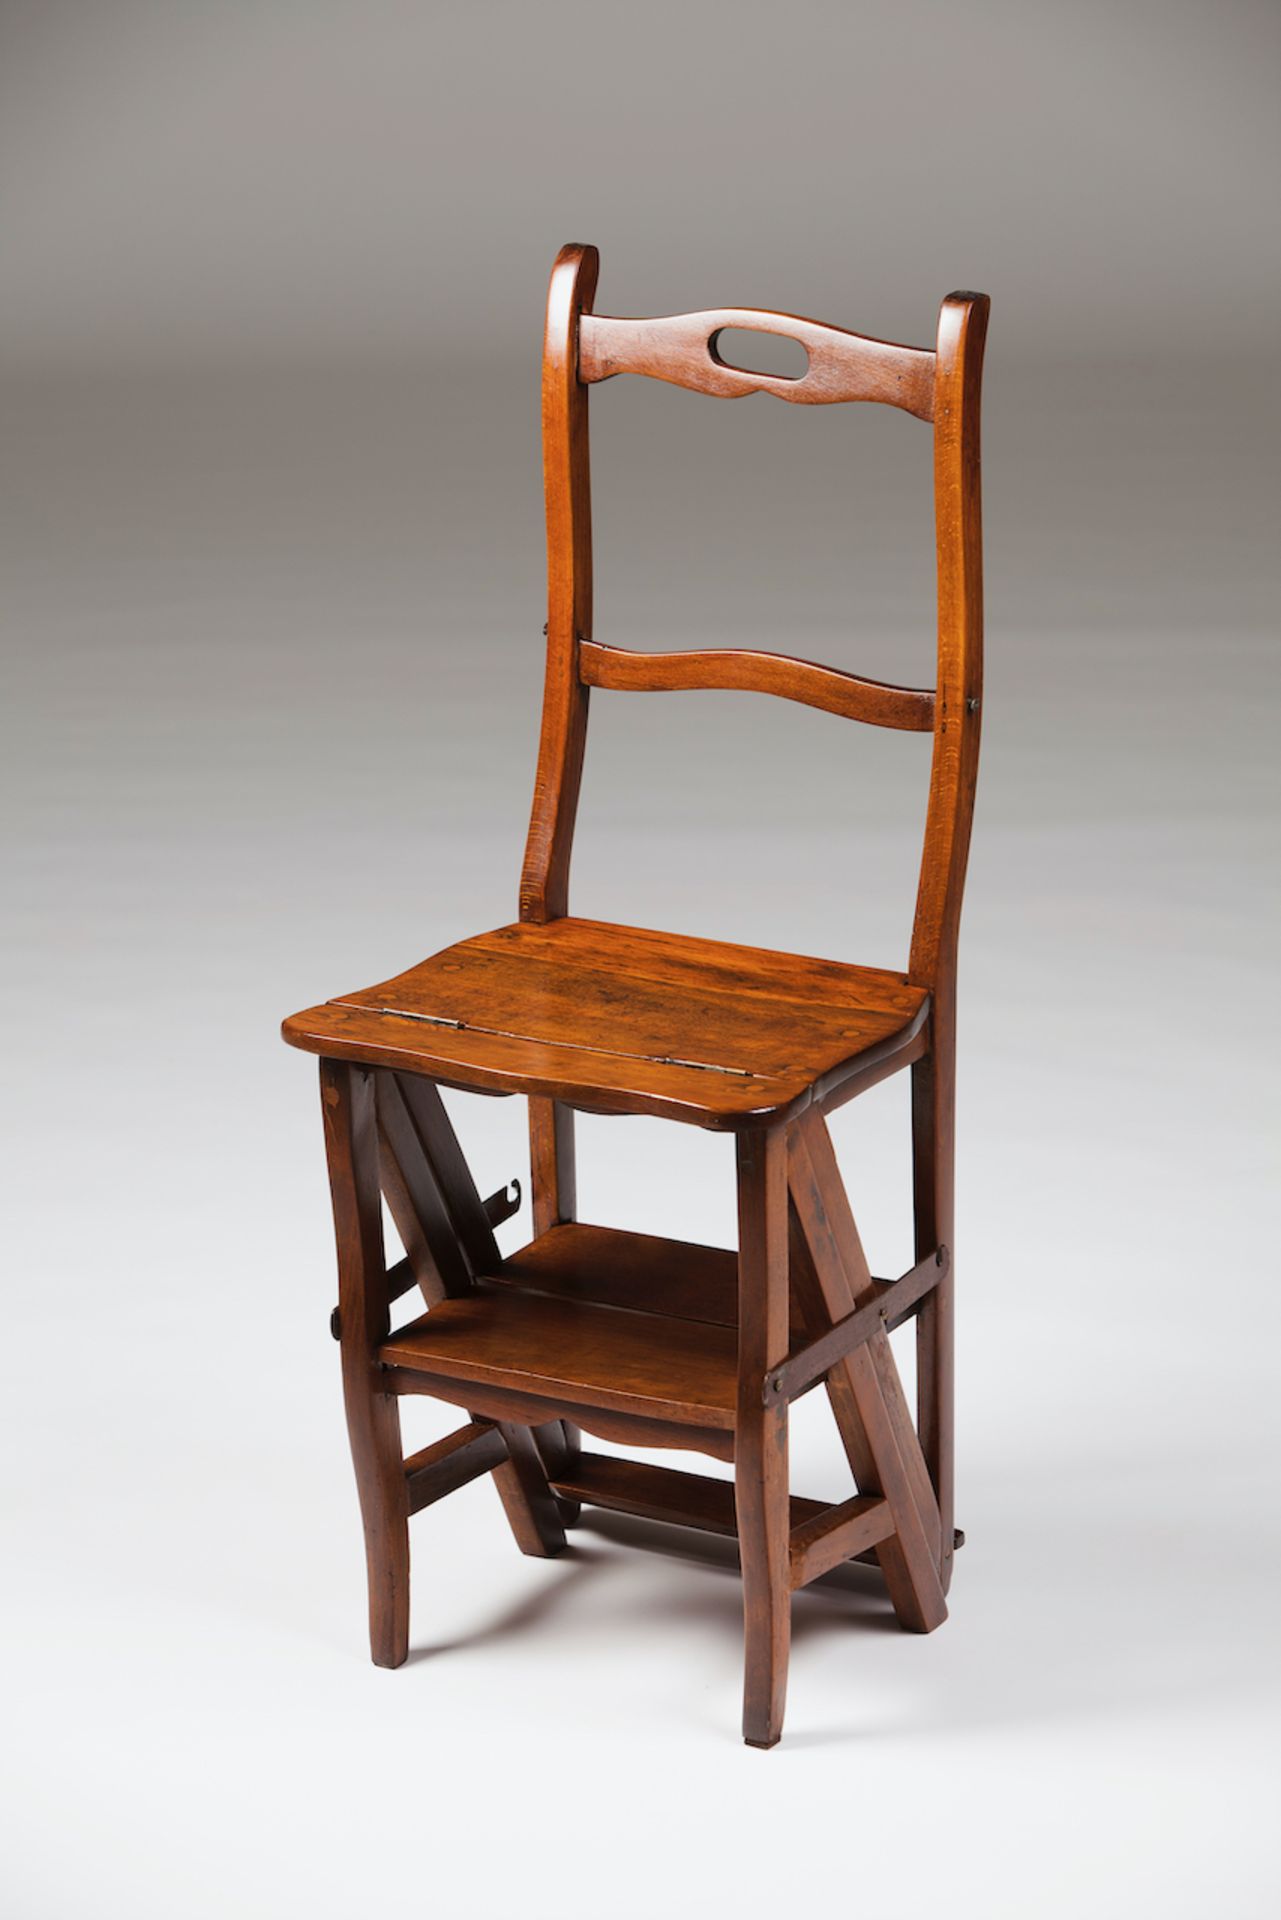 A library chair / step ladderChestnut19th century96x40x96 cm (total opened)